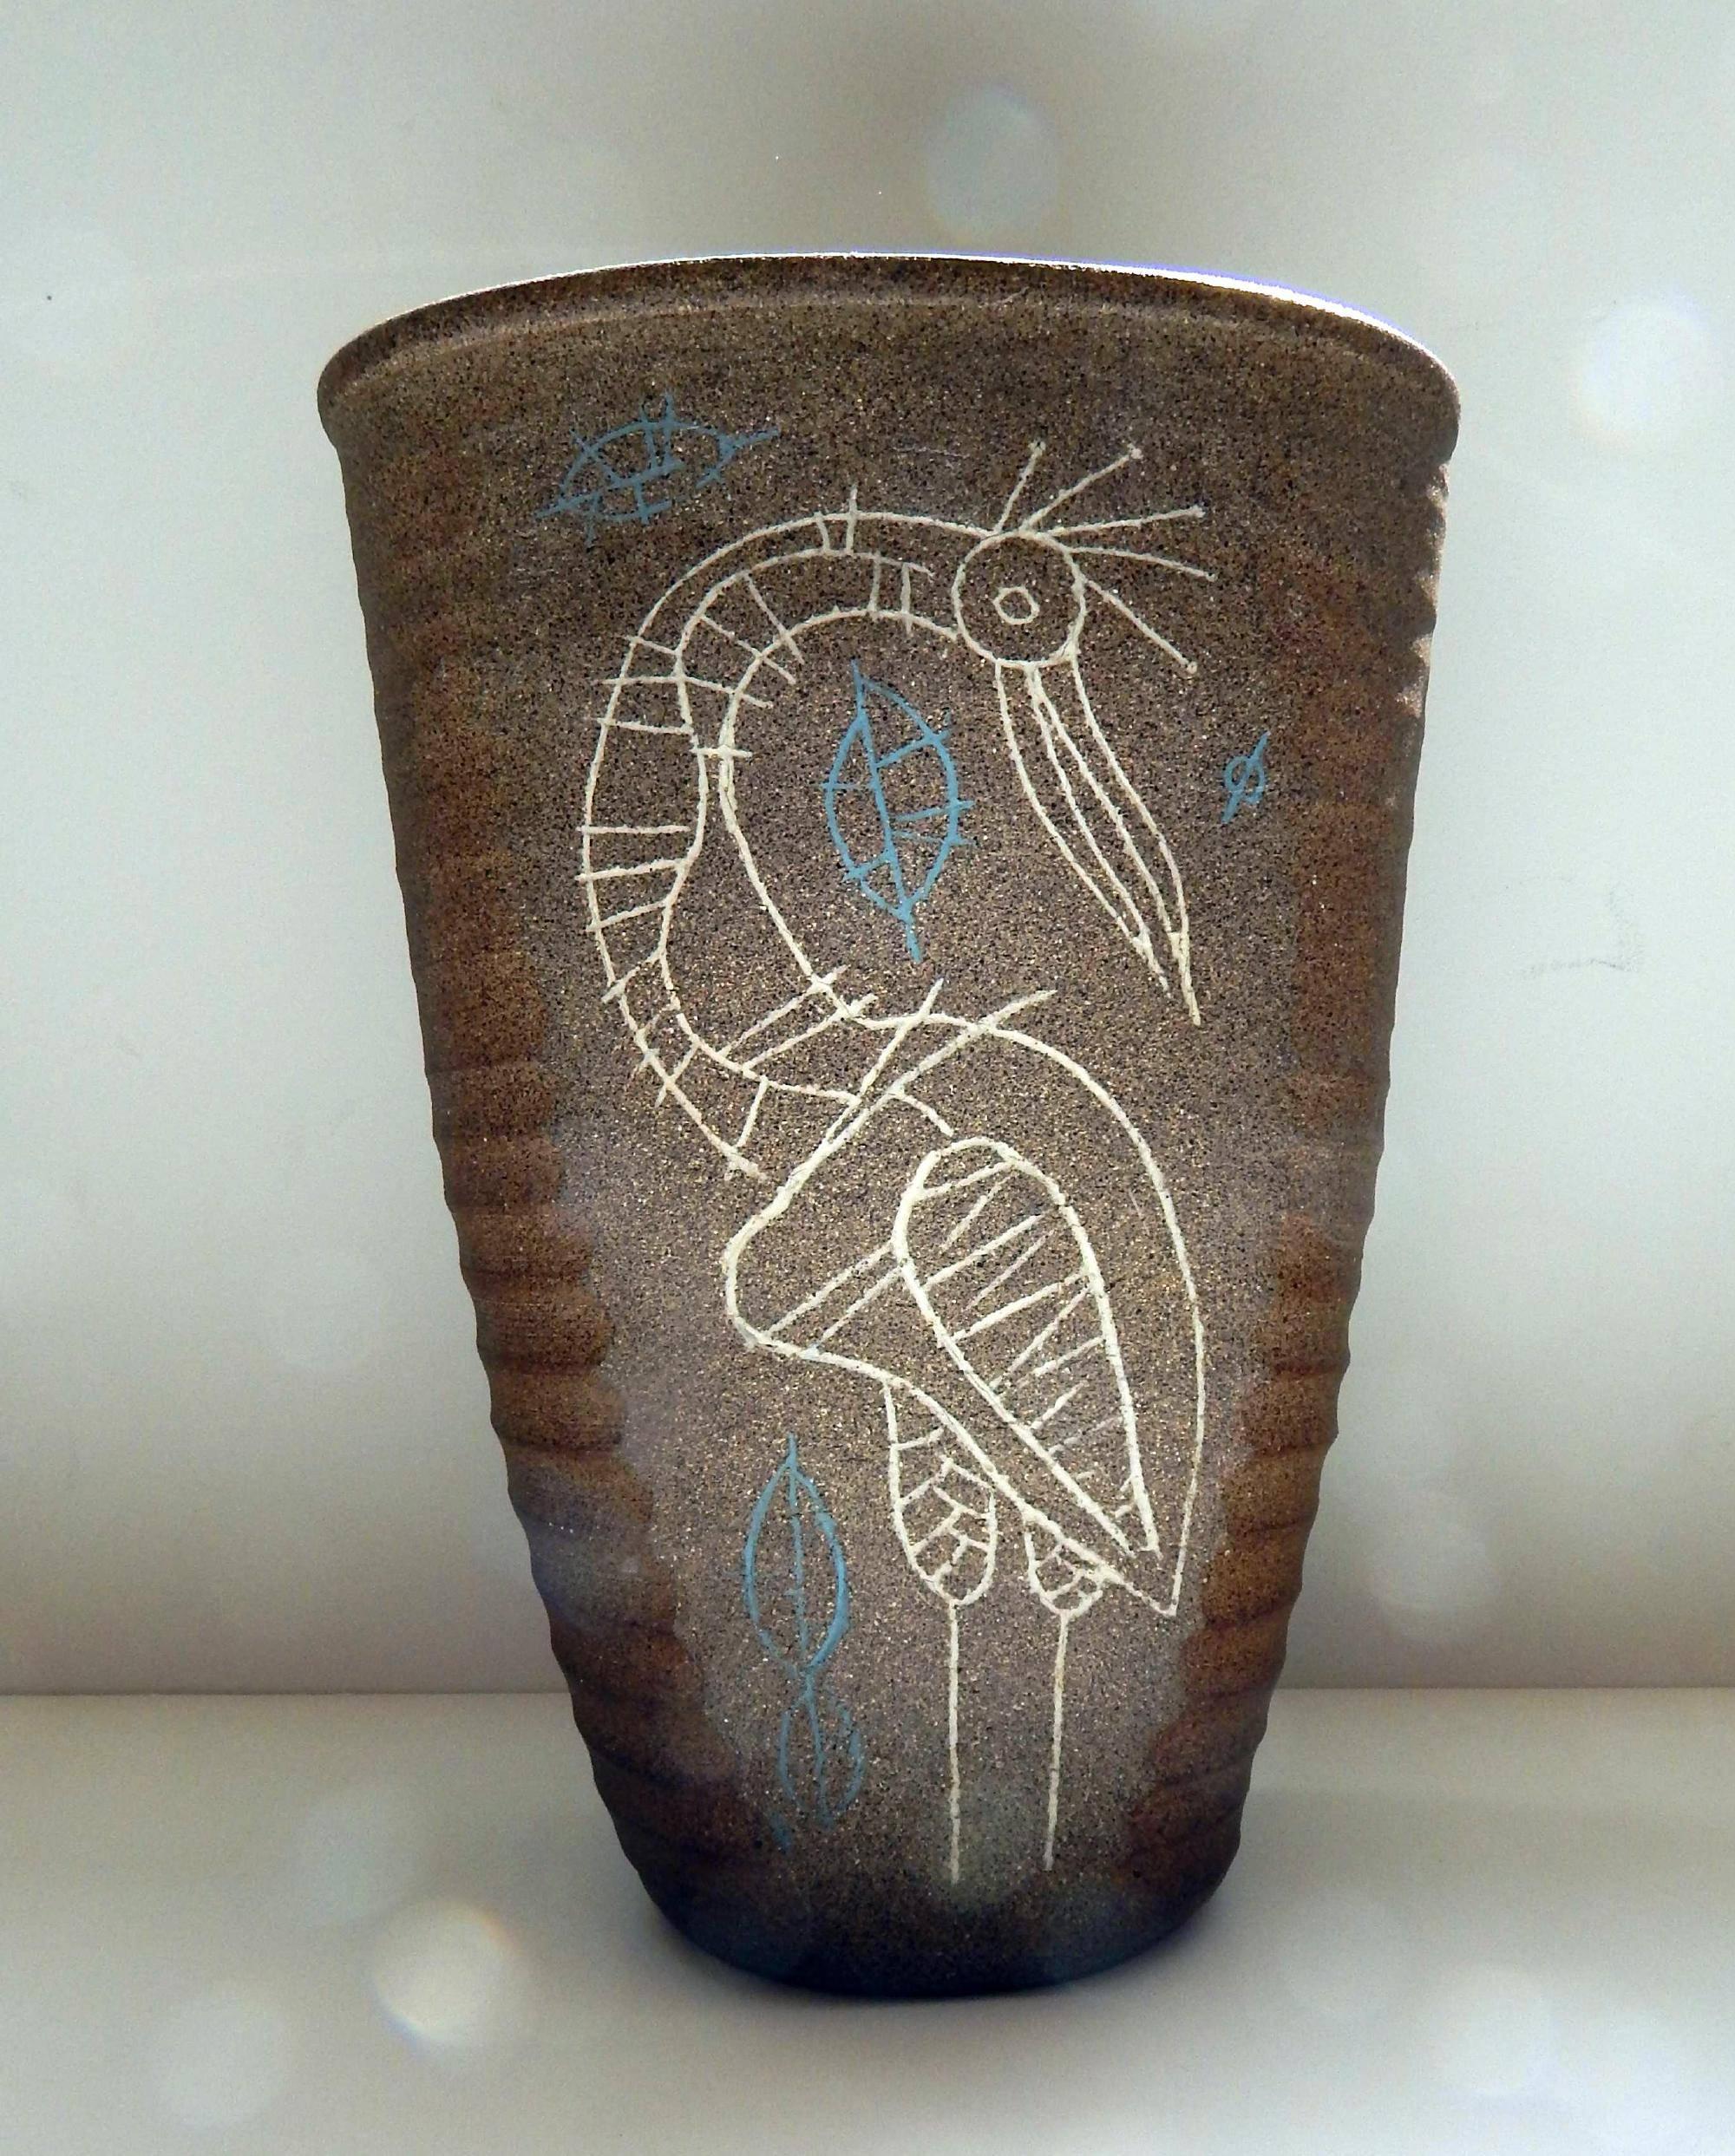 Large Studio pottery vase with bird motif on both sides.
Both signatures are incised on the bottom: A. Bohrod and F.C. Ball.
Measures: 10.5